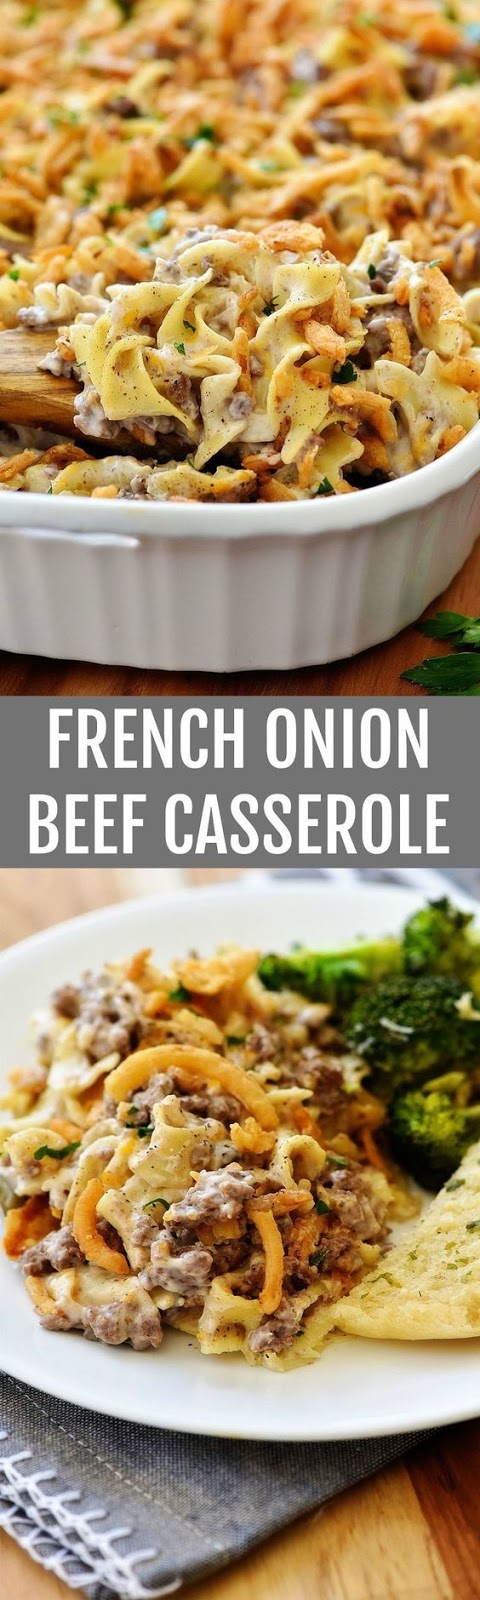 French Onion Beef Casserole Recipes